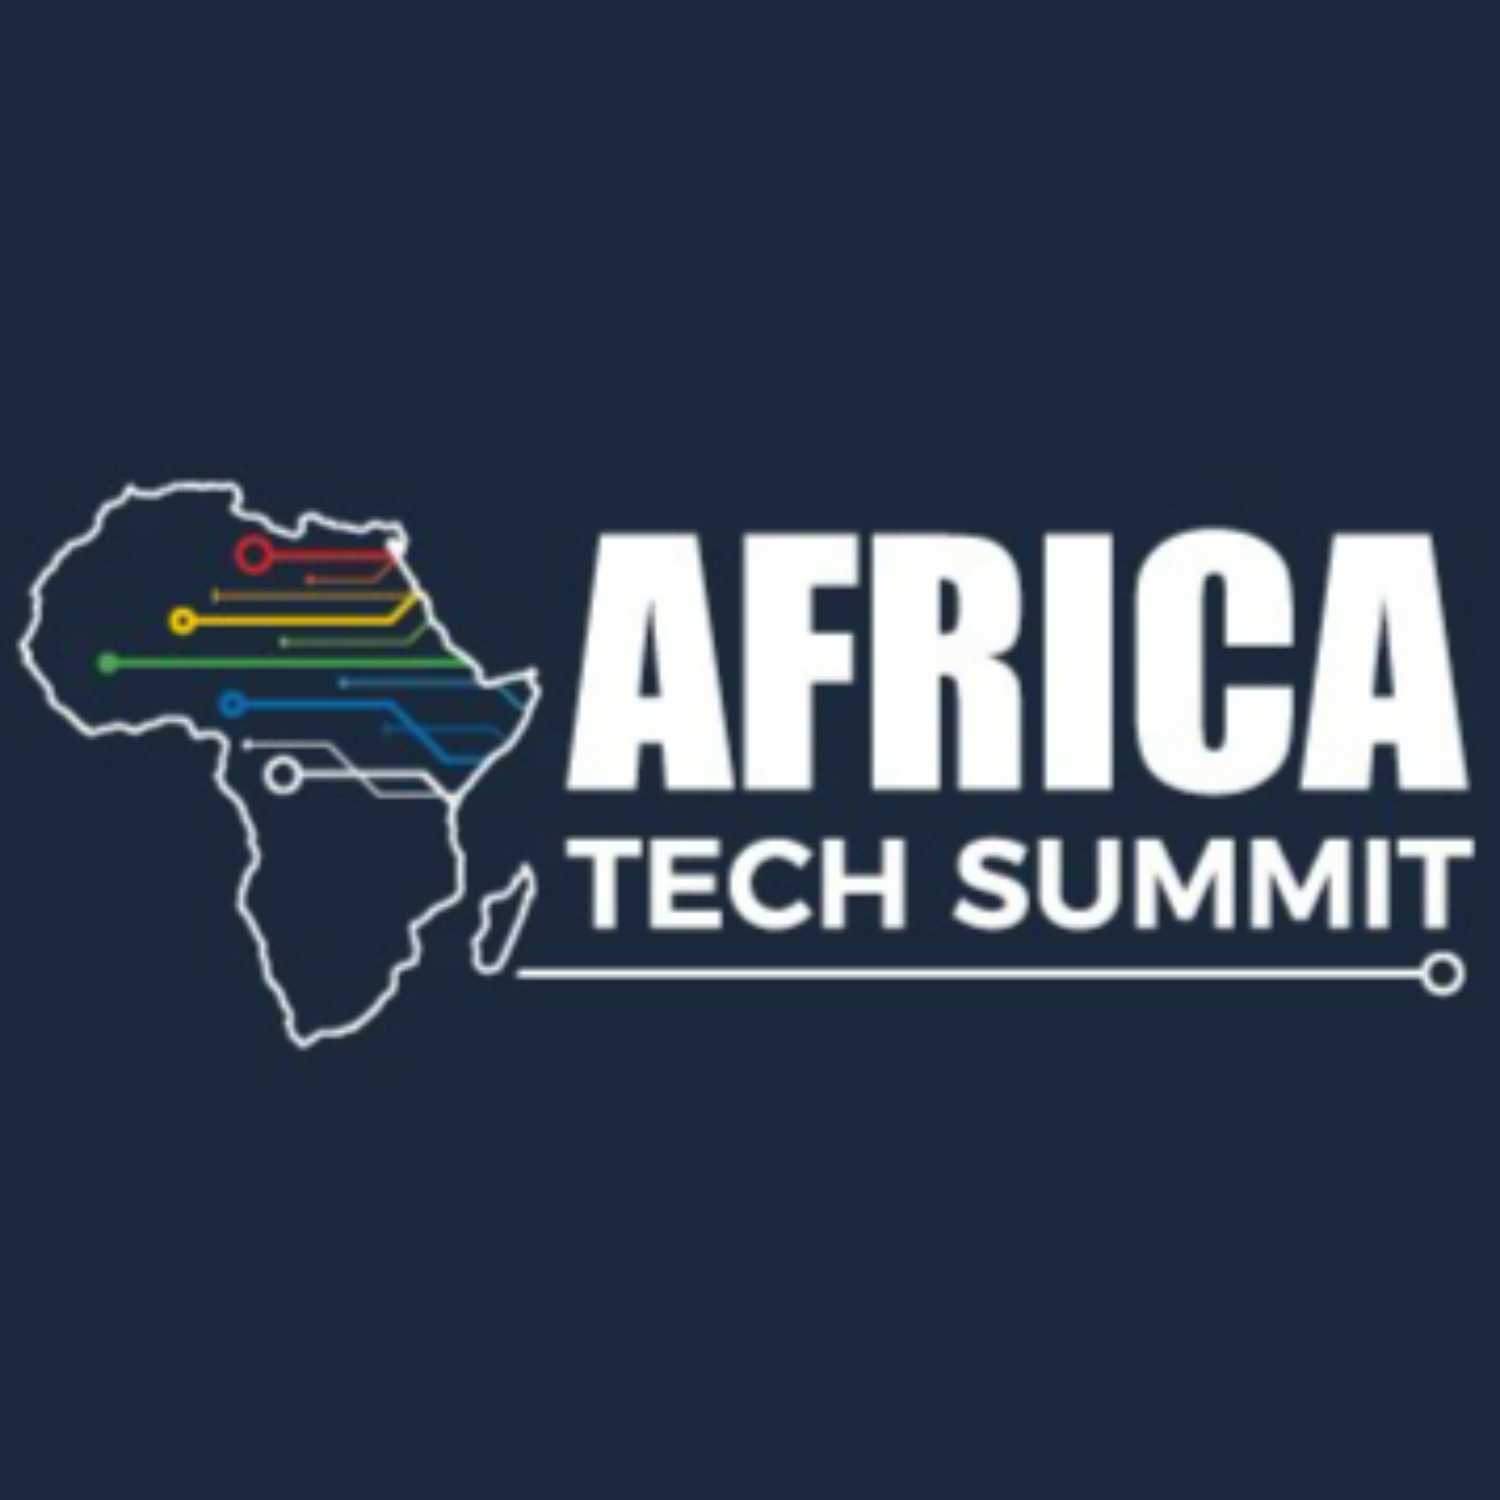 EP19: Africa Fintech Investment - Outlook and Insights